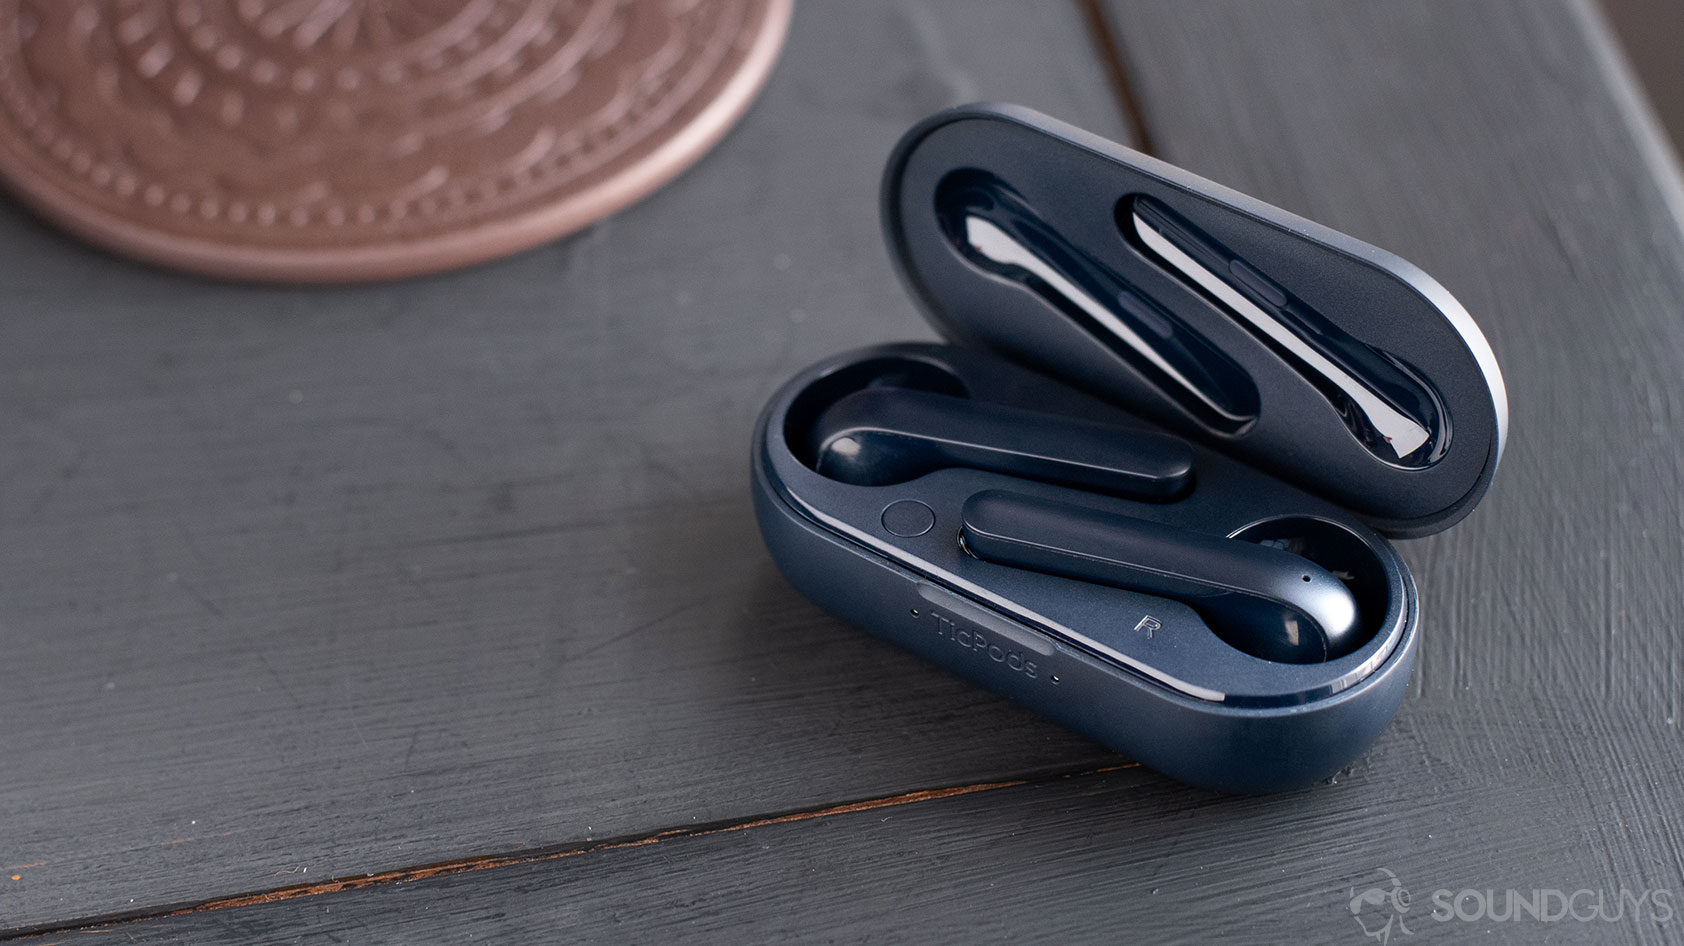 The Mobvoi TicPods 2 Pro true wireless earbuds in the charging case, both of which are navy.